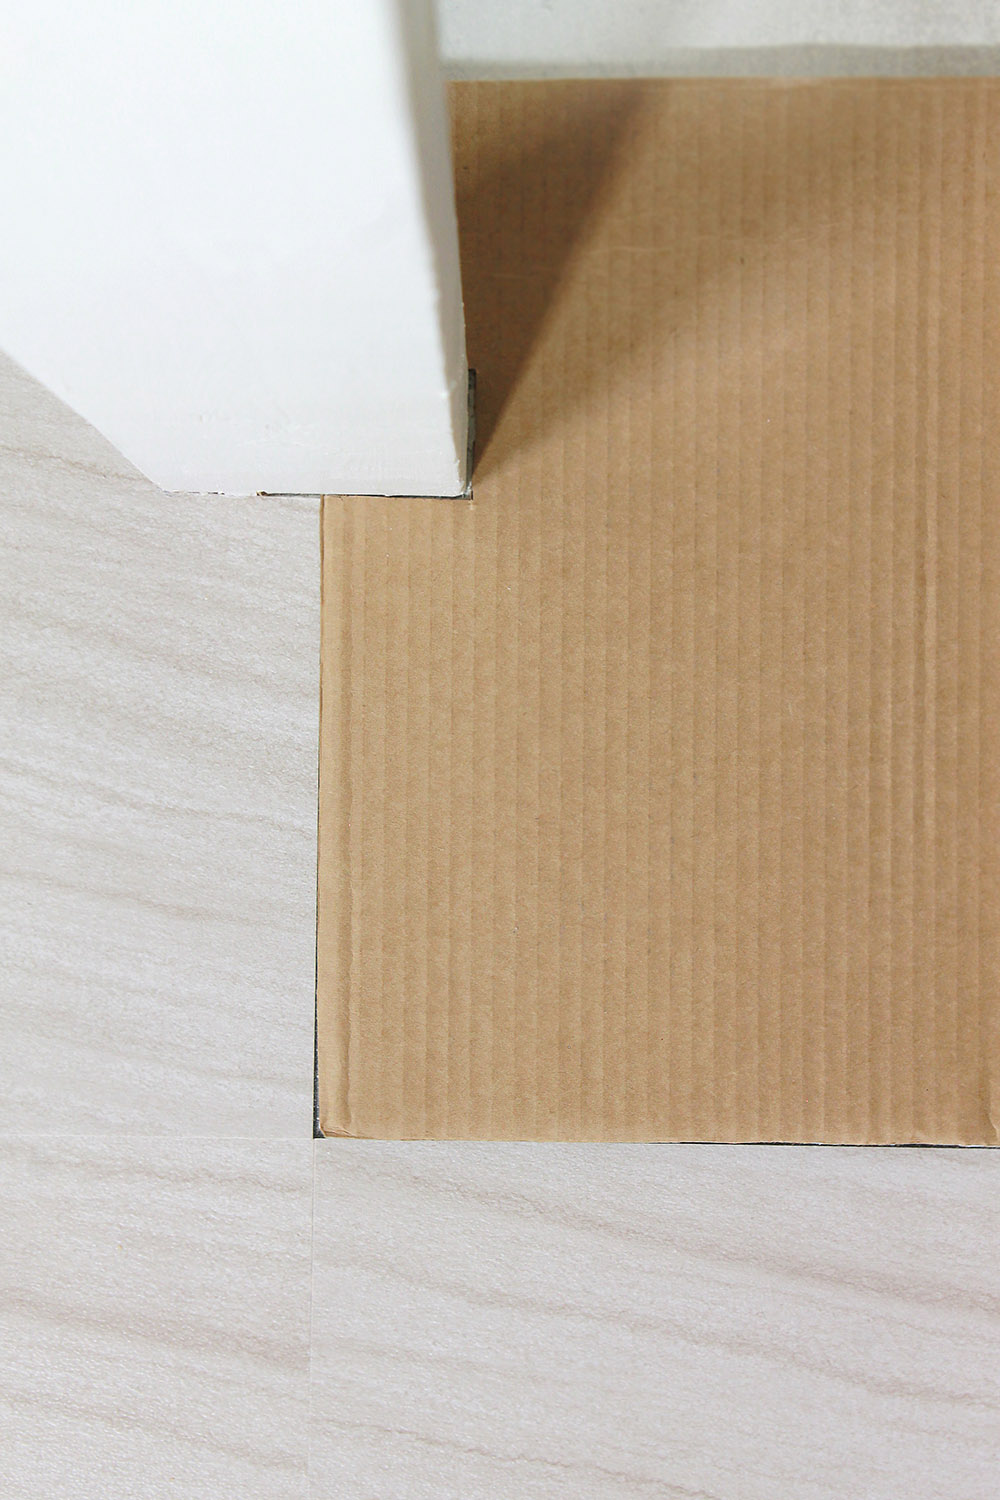 A piece of cardboard fits snugly against a wall post.